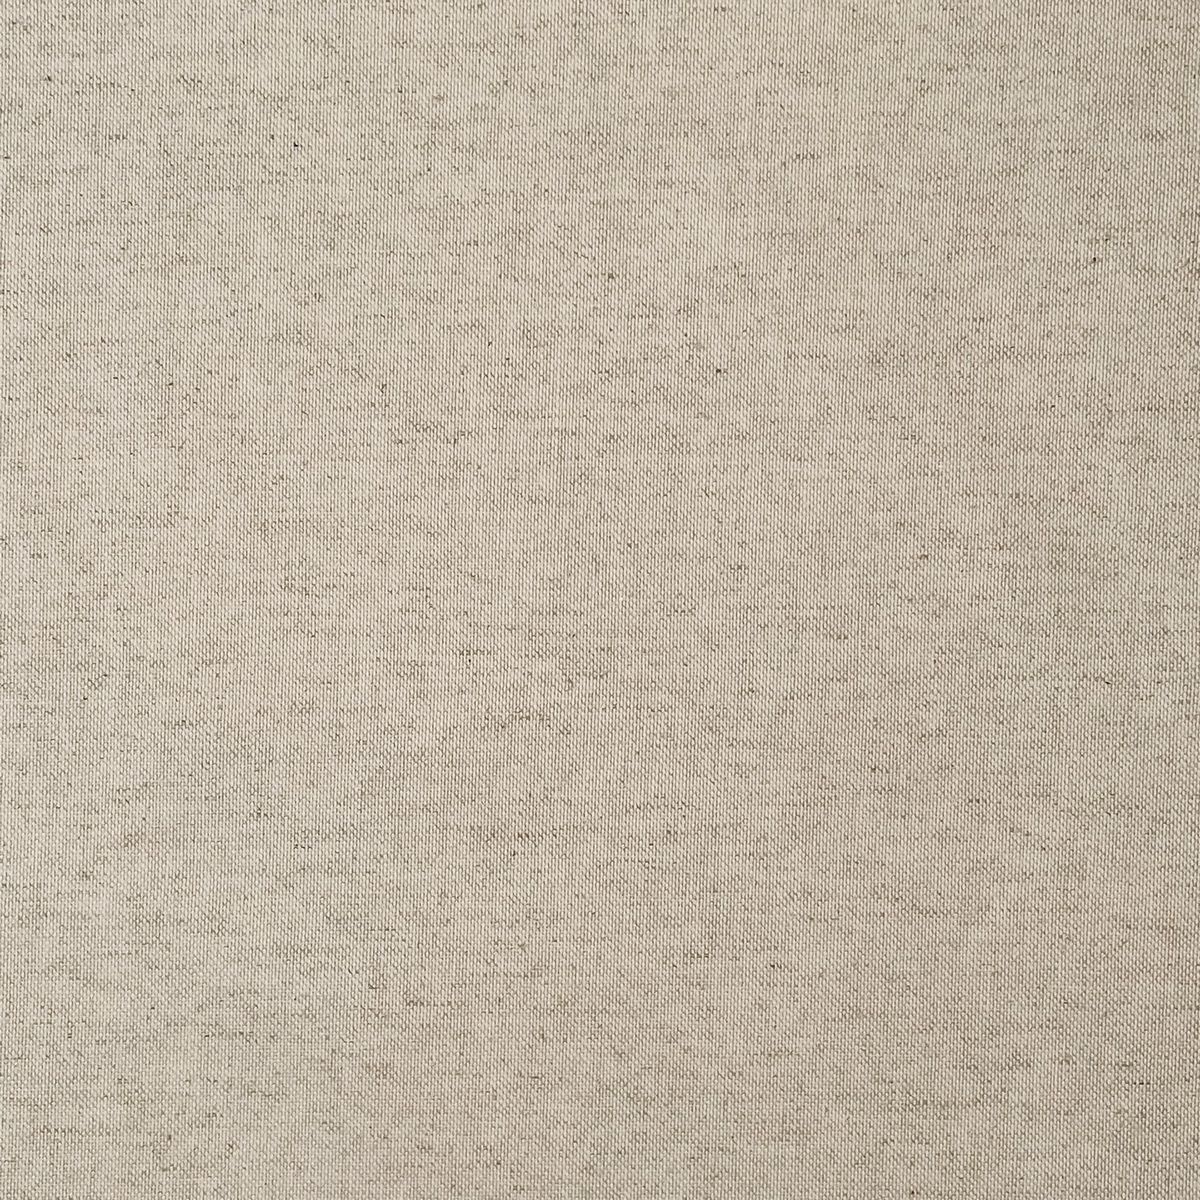 Rimini Natural Fabric by Chatham Glyn